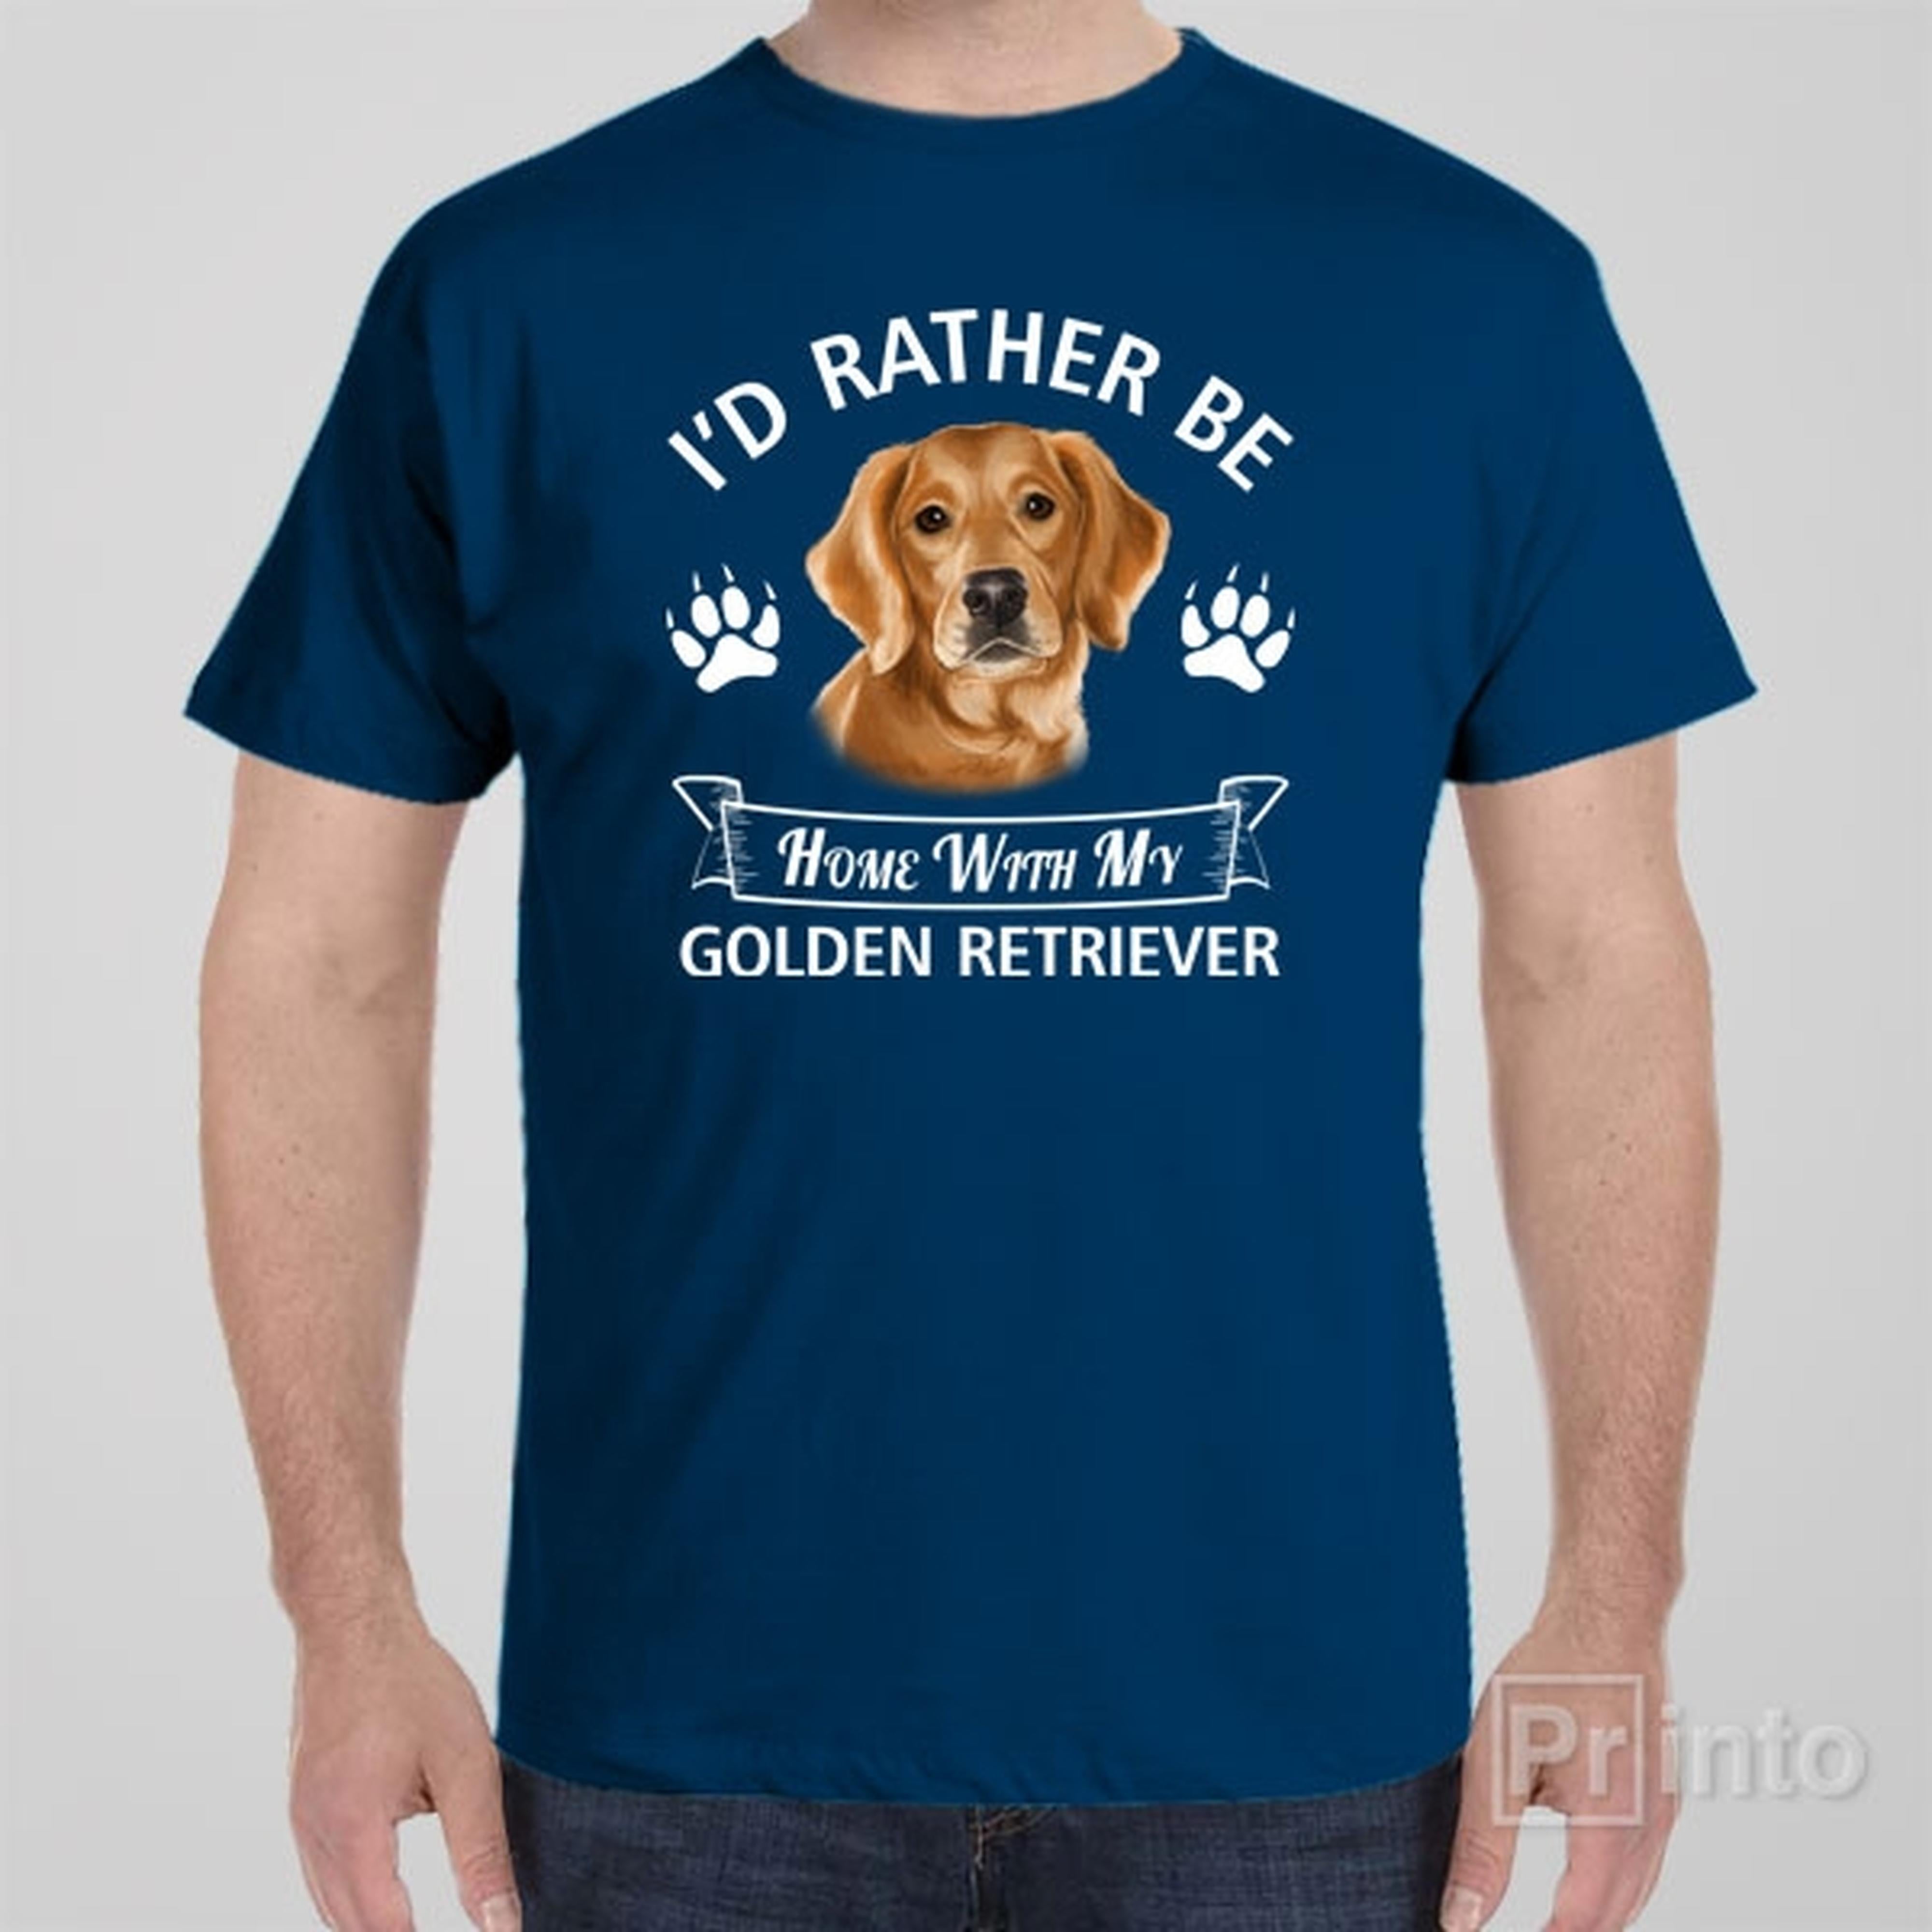 id-rather-stay-home-with-my-golden-retriever-t-shirt